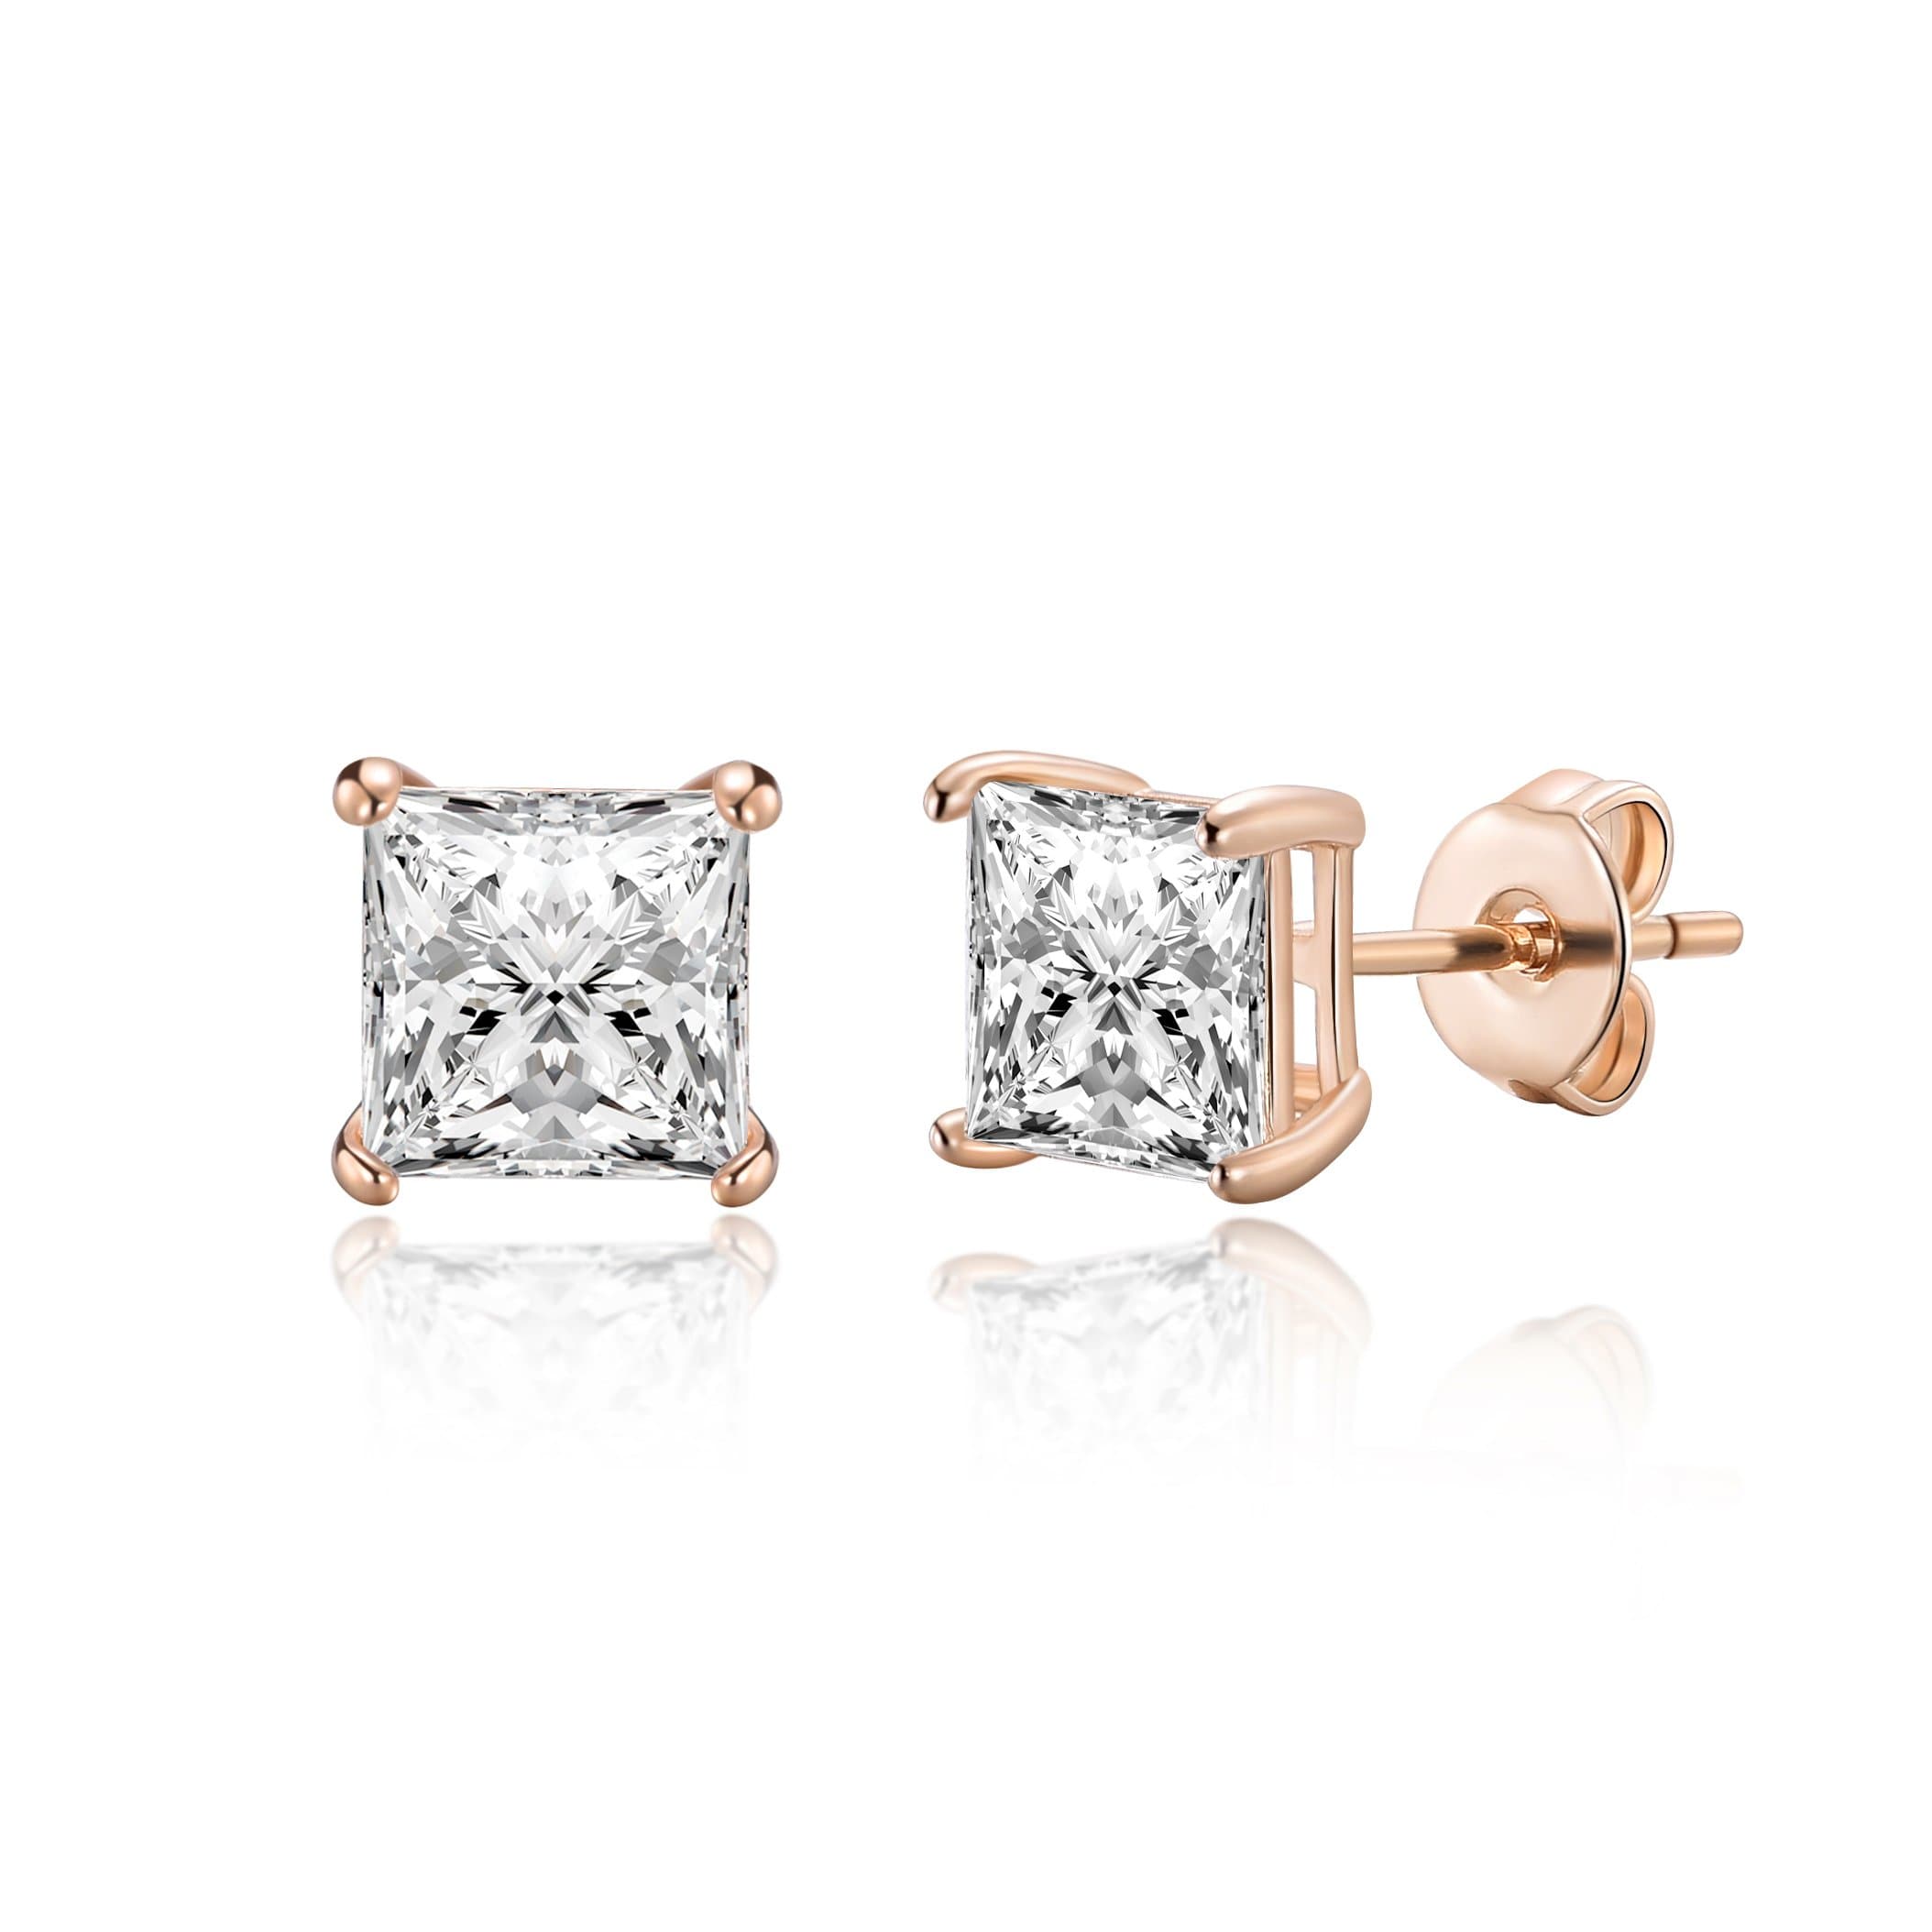 Rose Gold Plated Square Earrings Created with Zircondia® Crystals by Philip Jones Jewellery